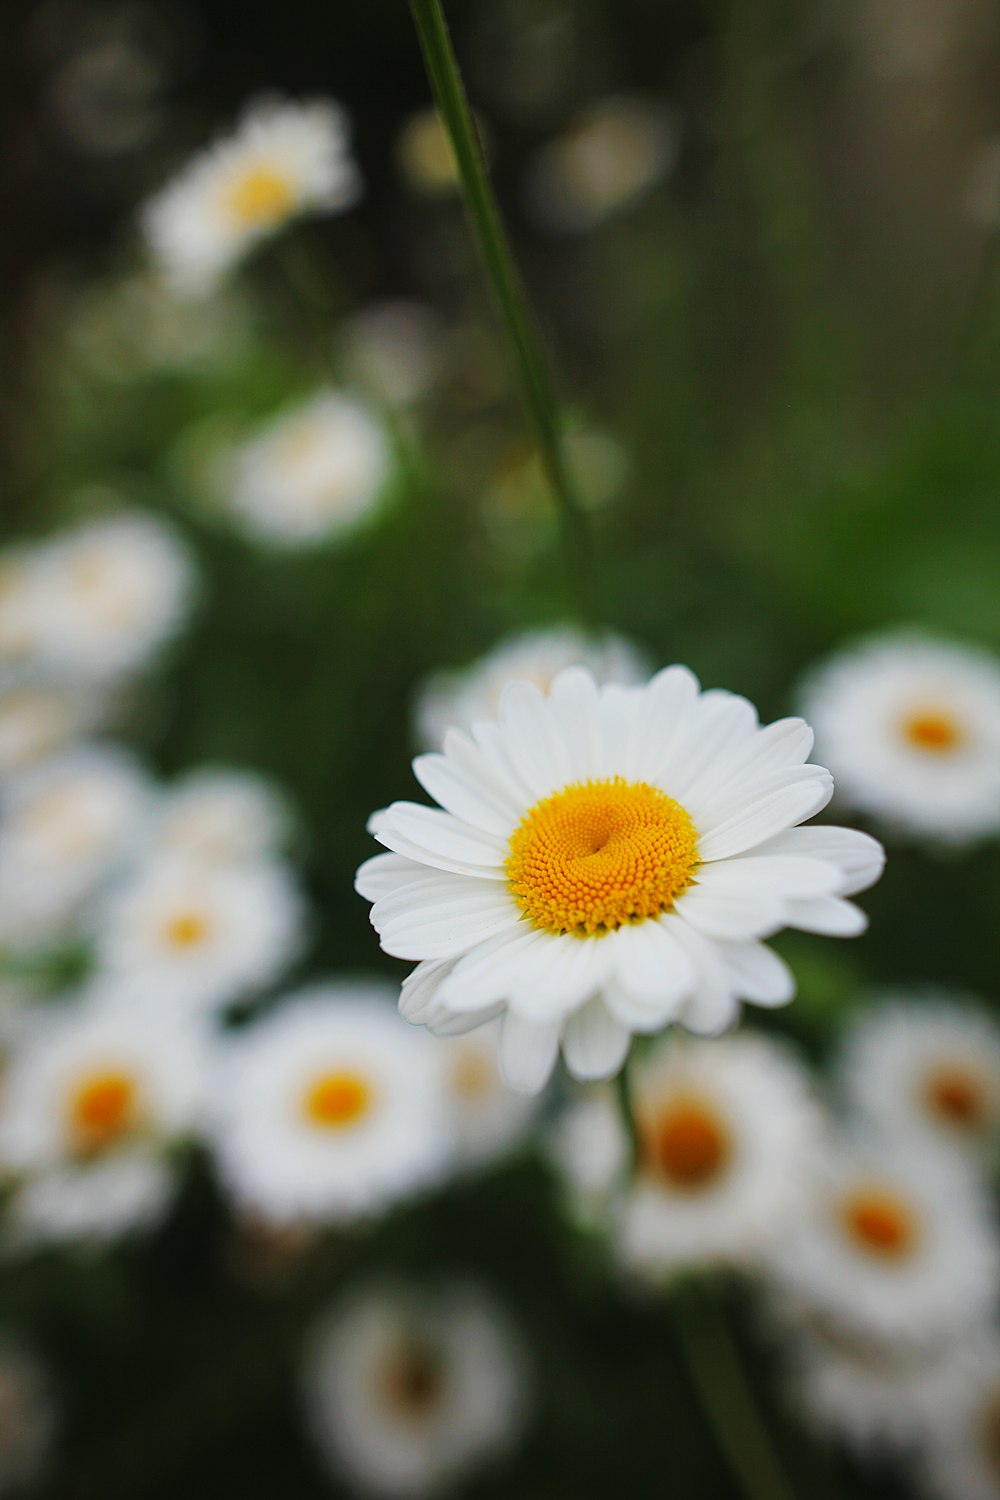 a close up of a white flower with yellow center